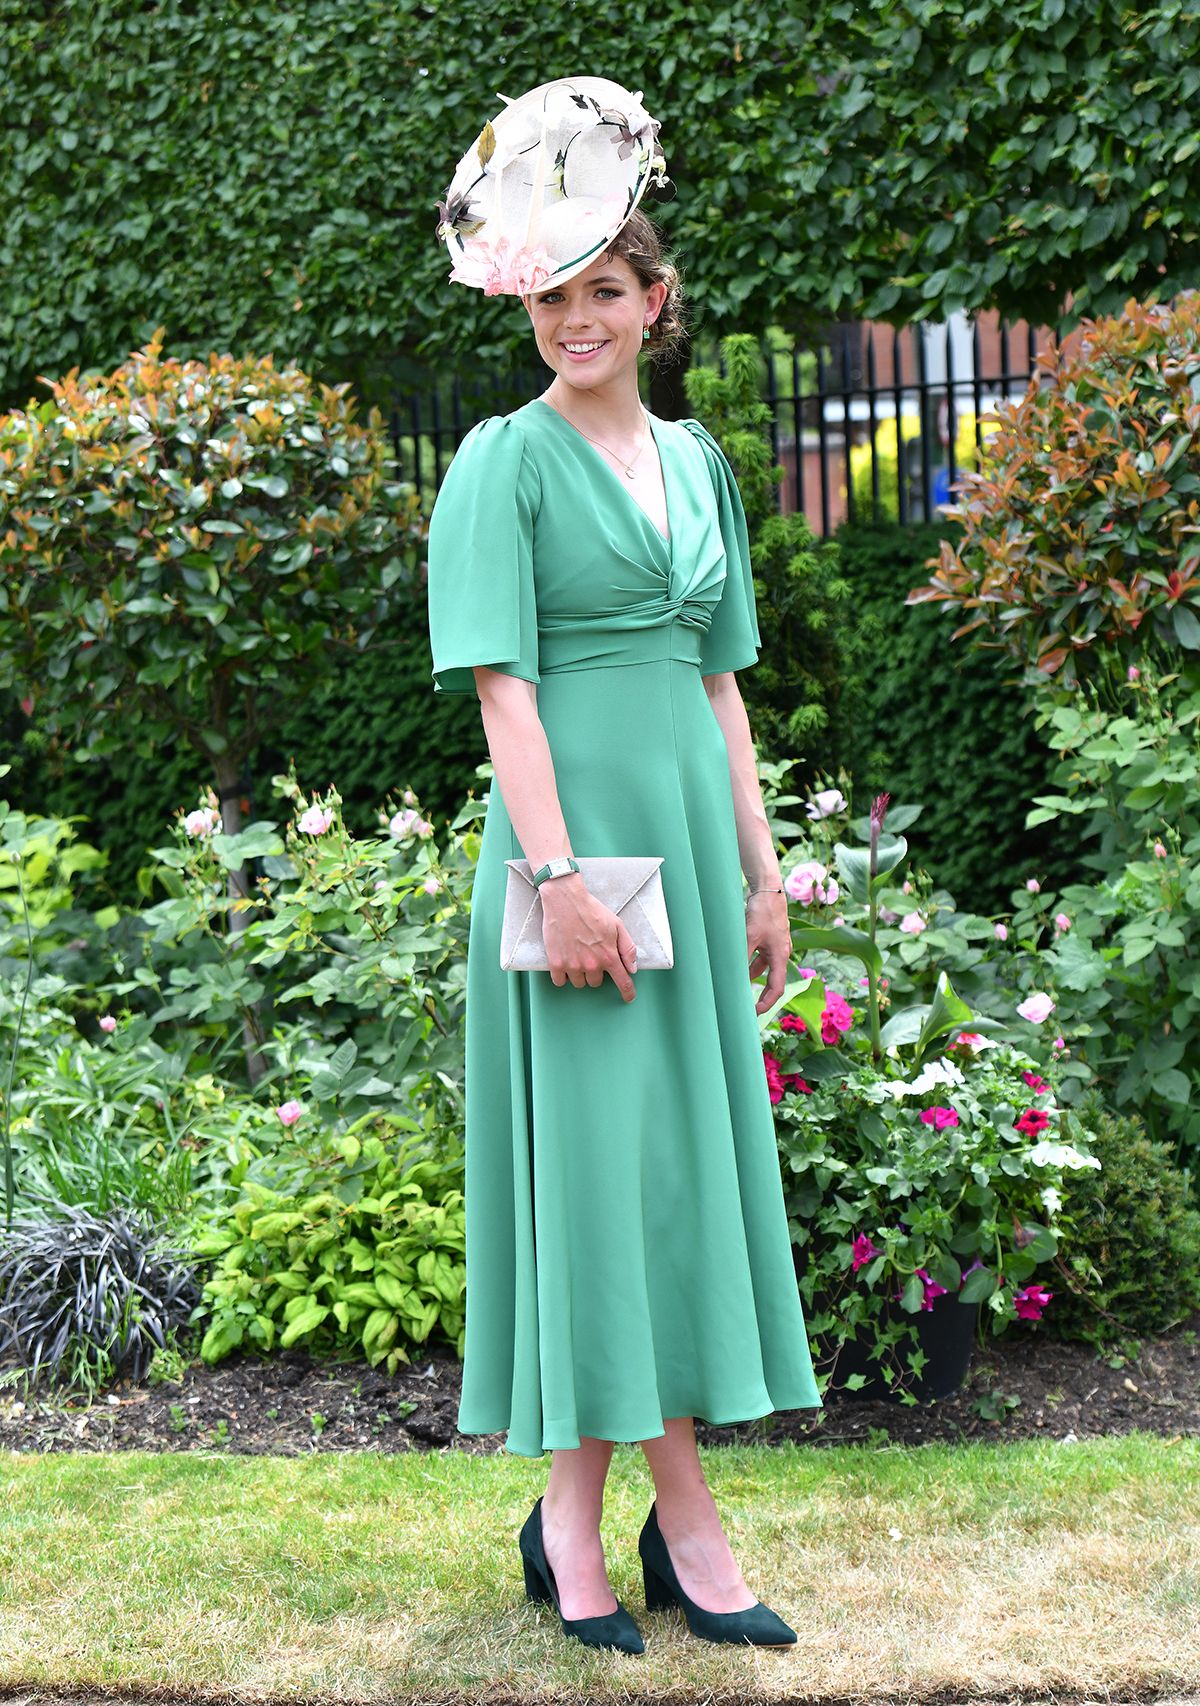 This Week’s Ultra-Fabulous Ascot Outfits Are Exactly What I Needed